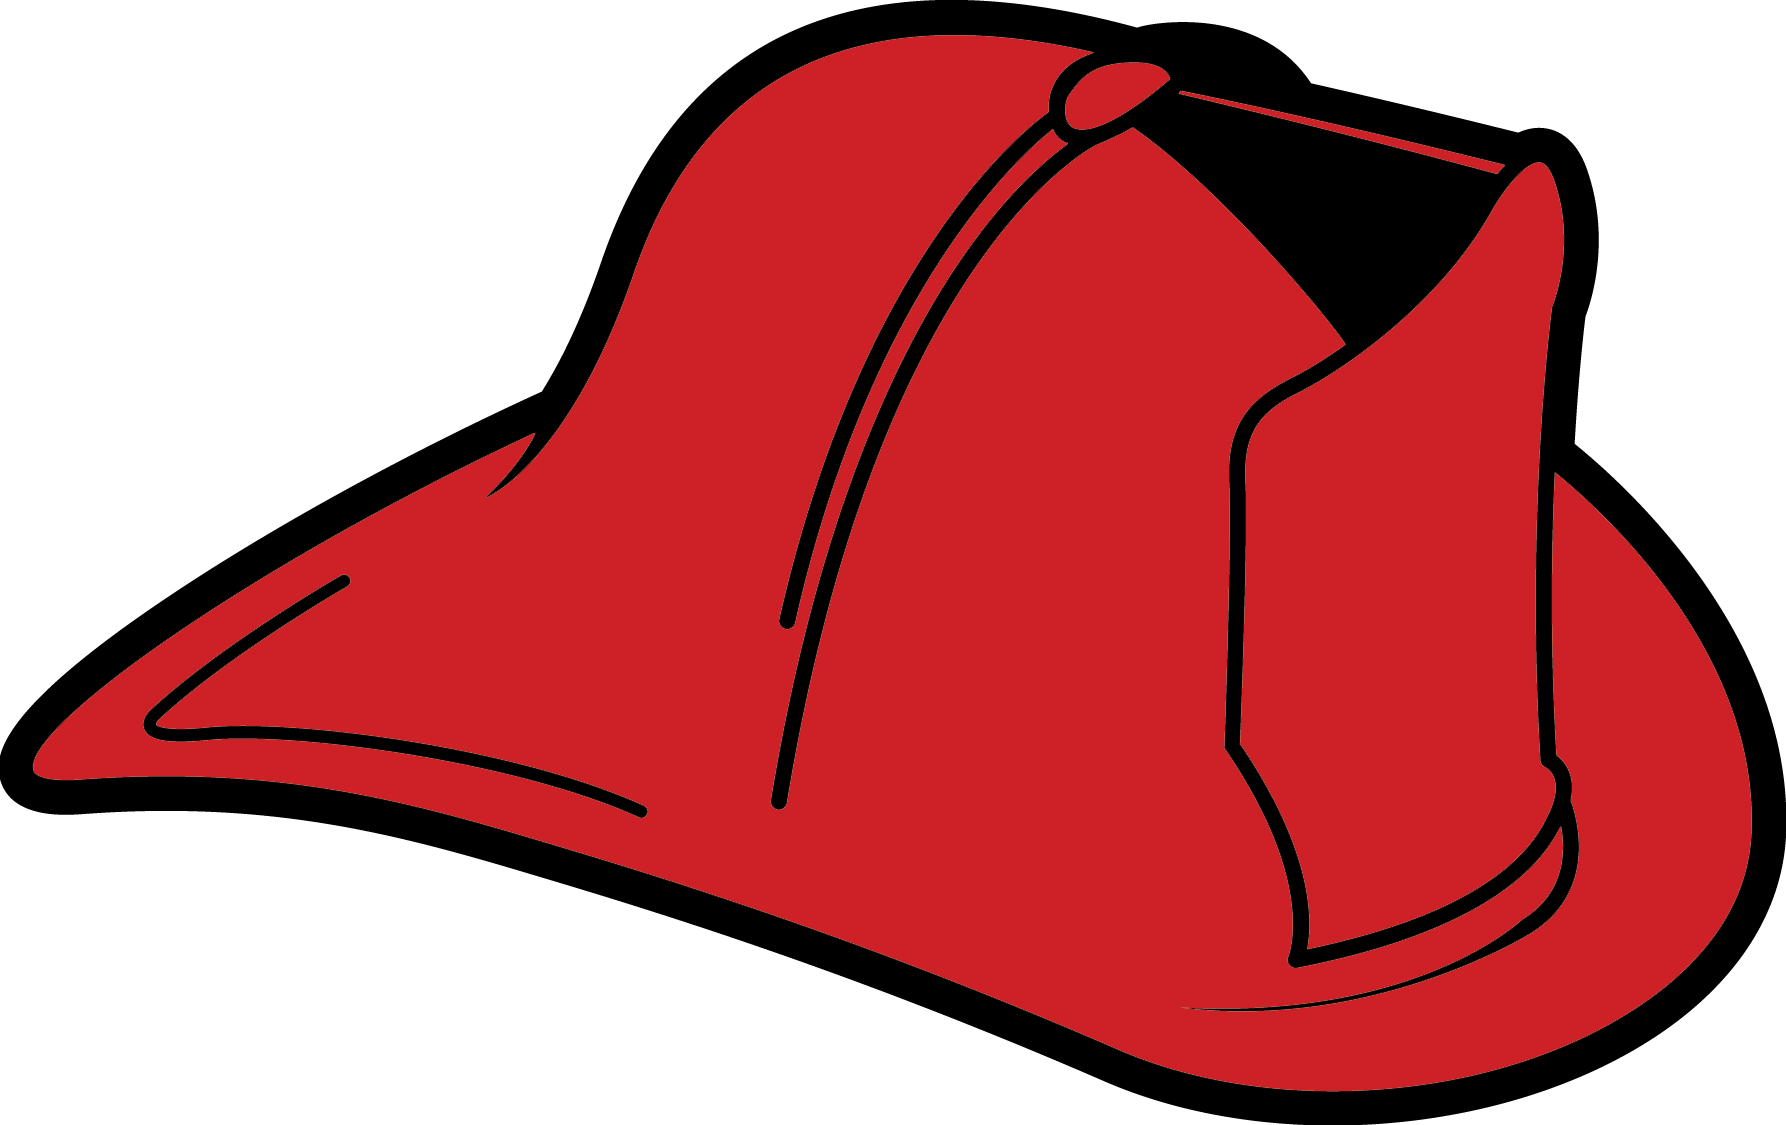 firefighter hat clipart - photo #5